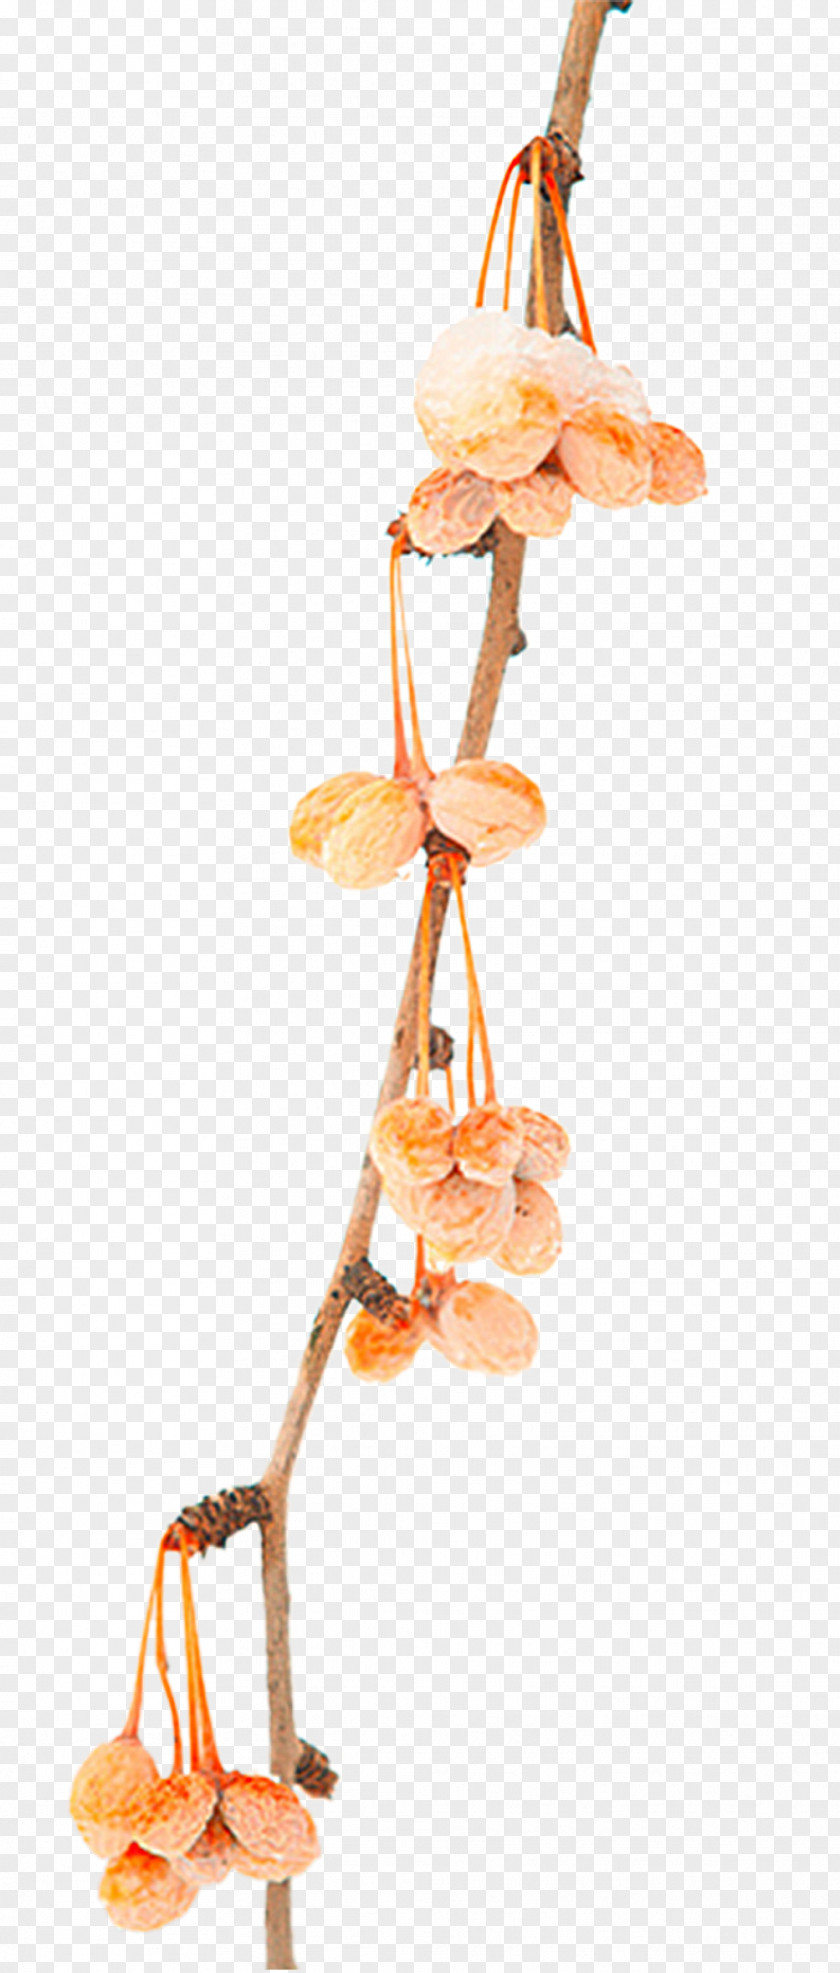 A Snow-covered Withered Ginkgo Fruit Download PNG